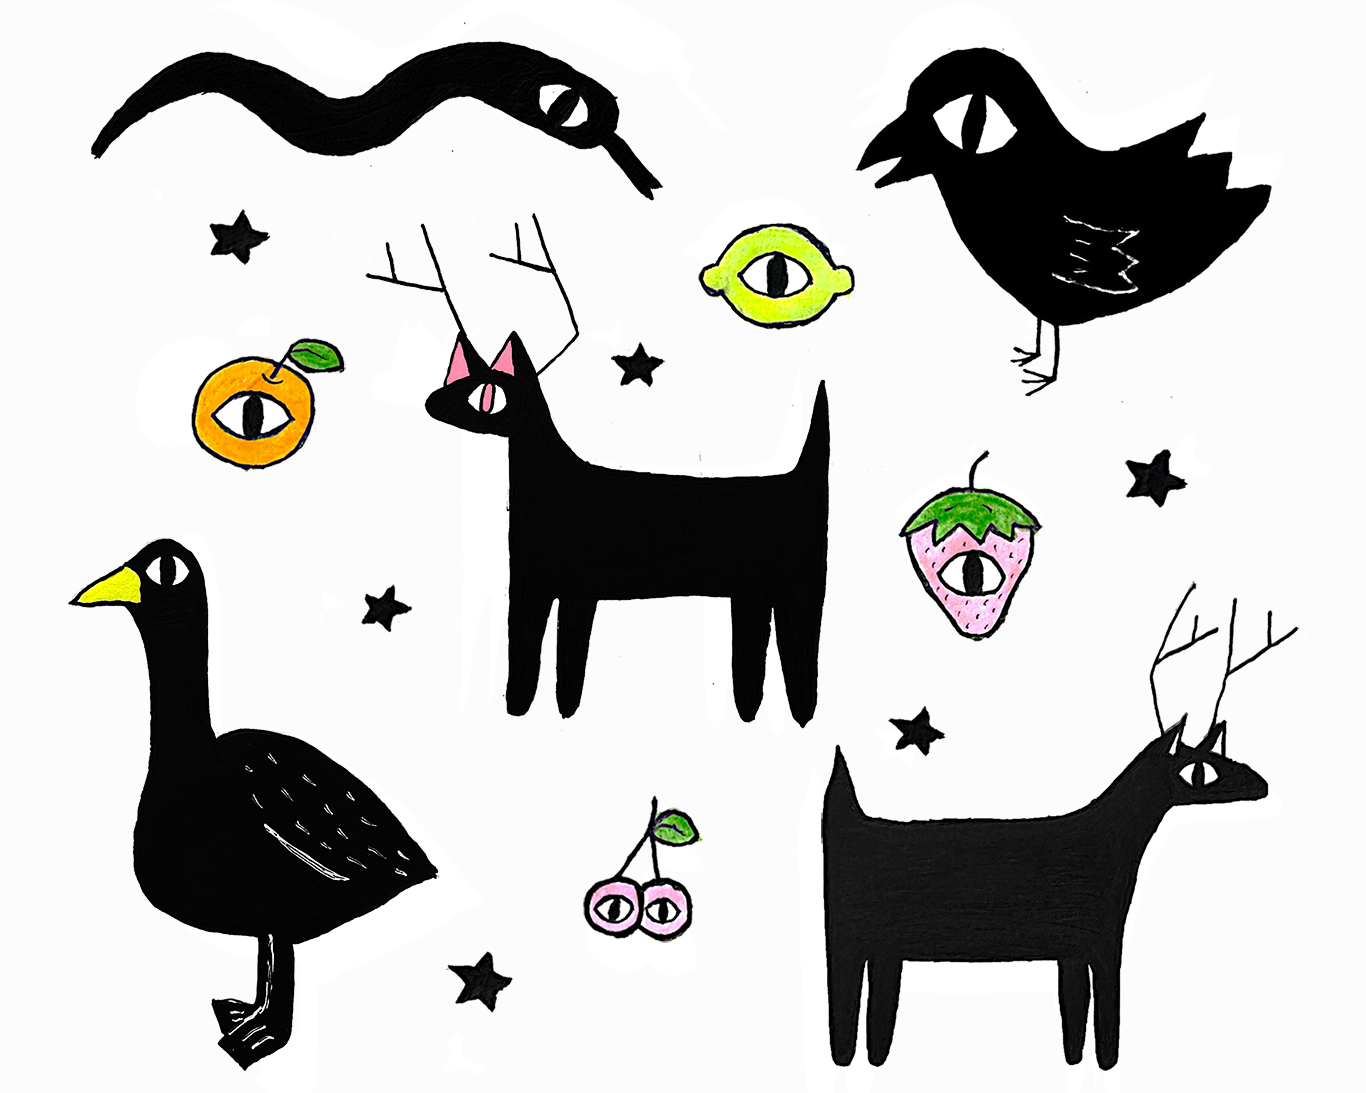 Drawings of 5 simply stylized, solid black animals, each with a single large eye—from left to right, top to bottom: A snake; A bird; A deer with pink inner-ear and pupil details; A longer-necked bird with a yellow beak; And finally, a slightly longer, solid black deer. Scattered between the animals are small, flat-colored, simply stylized drawings of an orange, a lemon, a strawberry, and a pair of cherries, each with a single eye similar to the animals’ eyes. There are 6 small black stars scattered amongst all the drawings. All of this lies on a slightly off-white background.